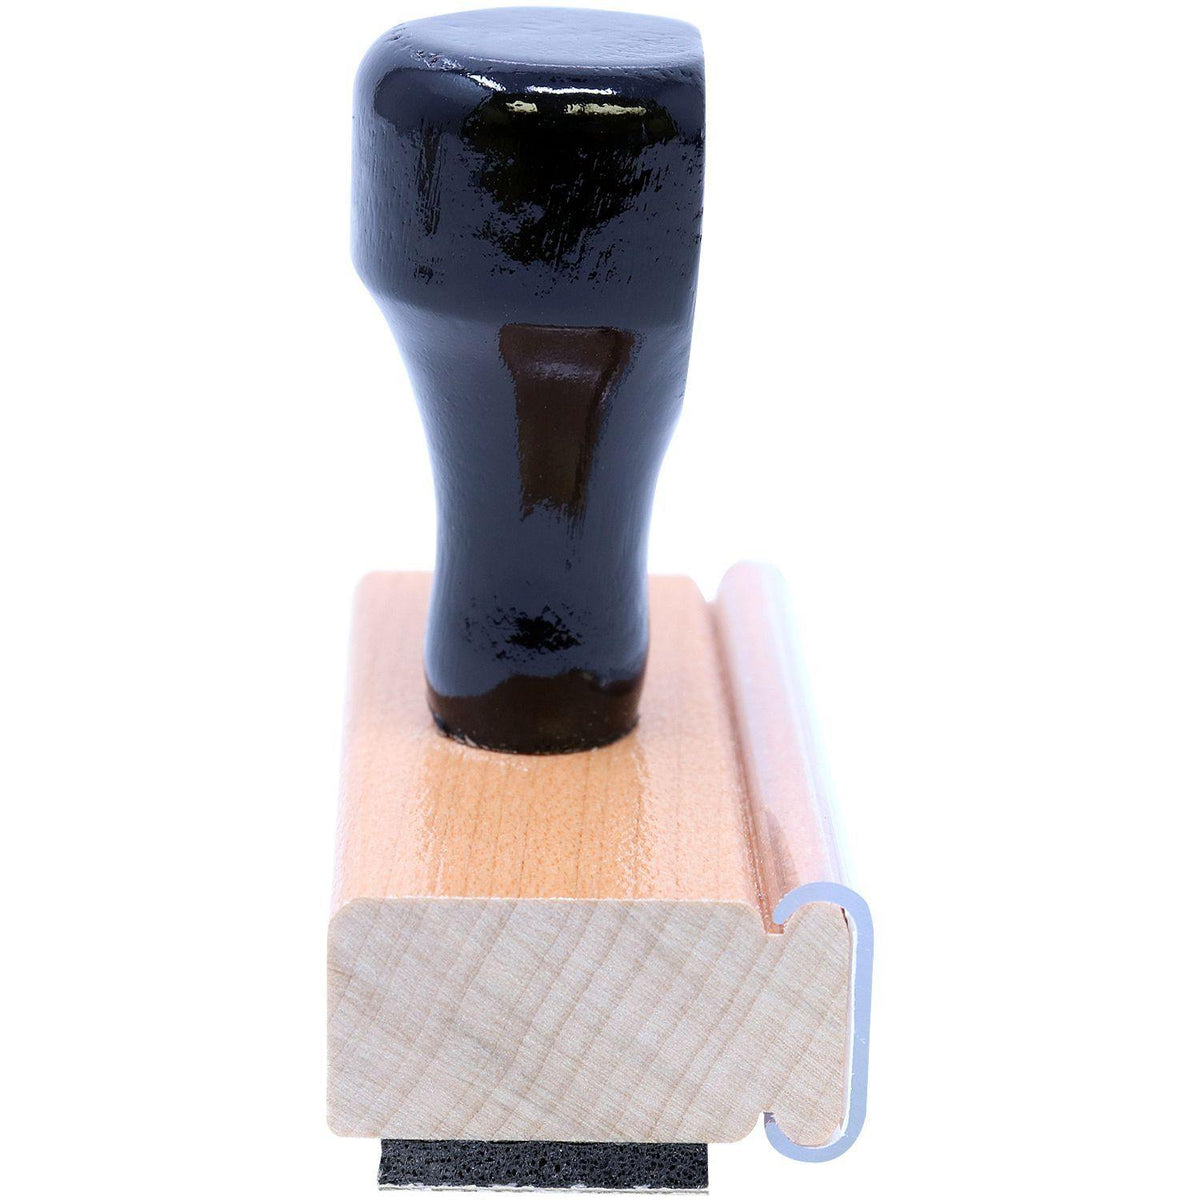 Perishable Rubber Stamp - Engineer Seal Stamps - Brand_Acorn, Impression Size_Small, Stamp Type_Regular Stamp, Type of Use_General, Type of Use_Postal &amp; Mailing